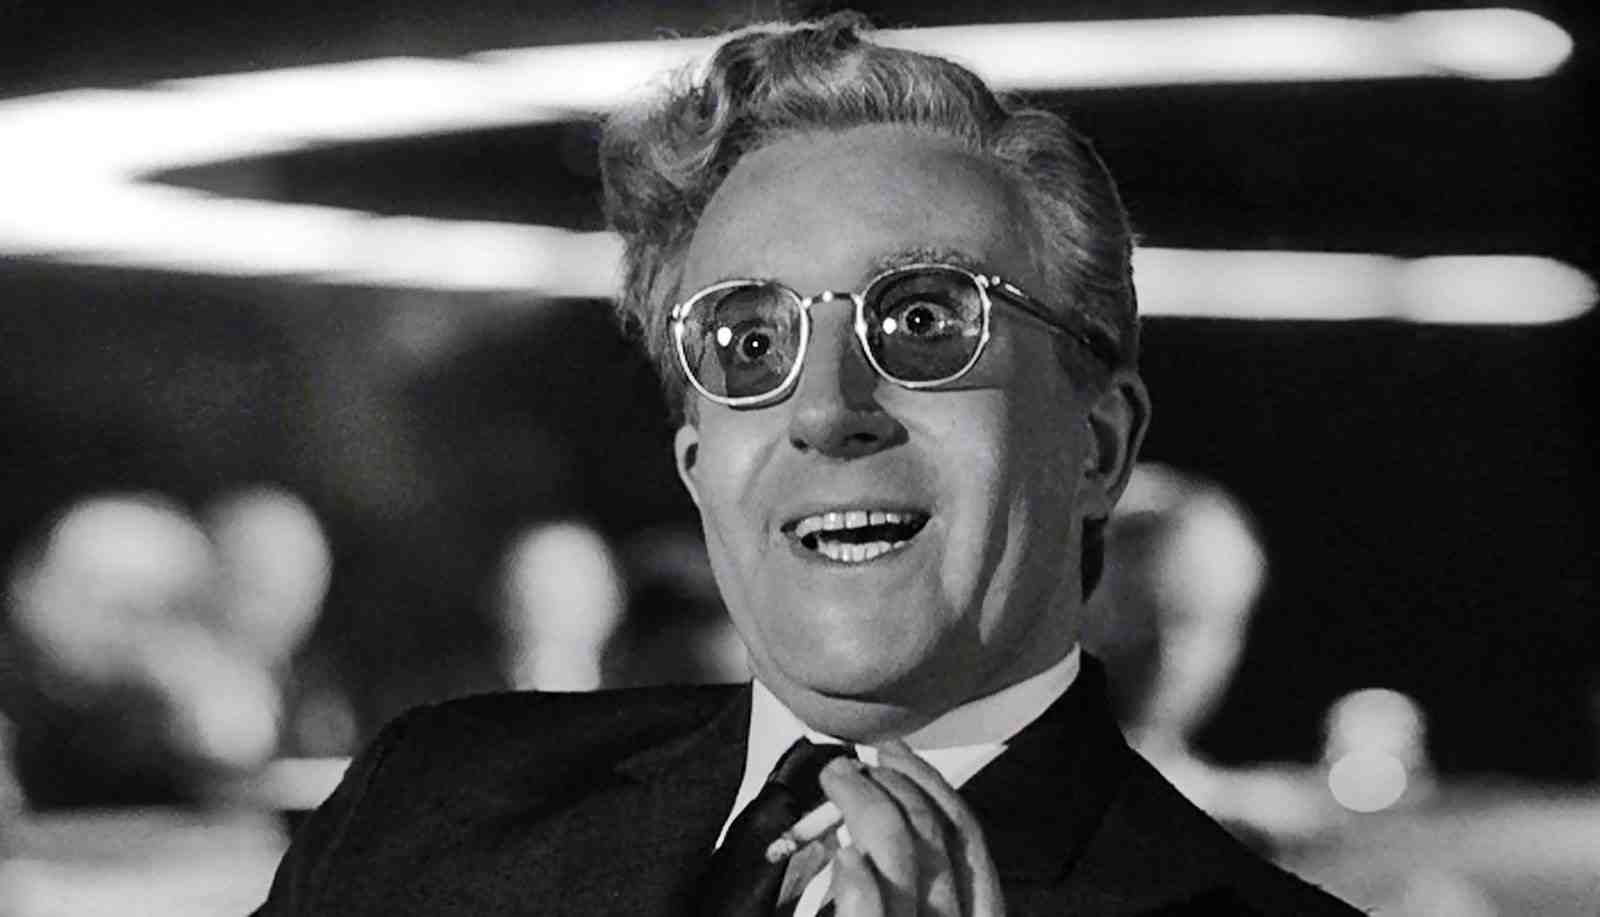 dr.-strangelove-or-how-i-learned-to-stop-worrying-and-love-the-bomb